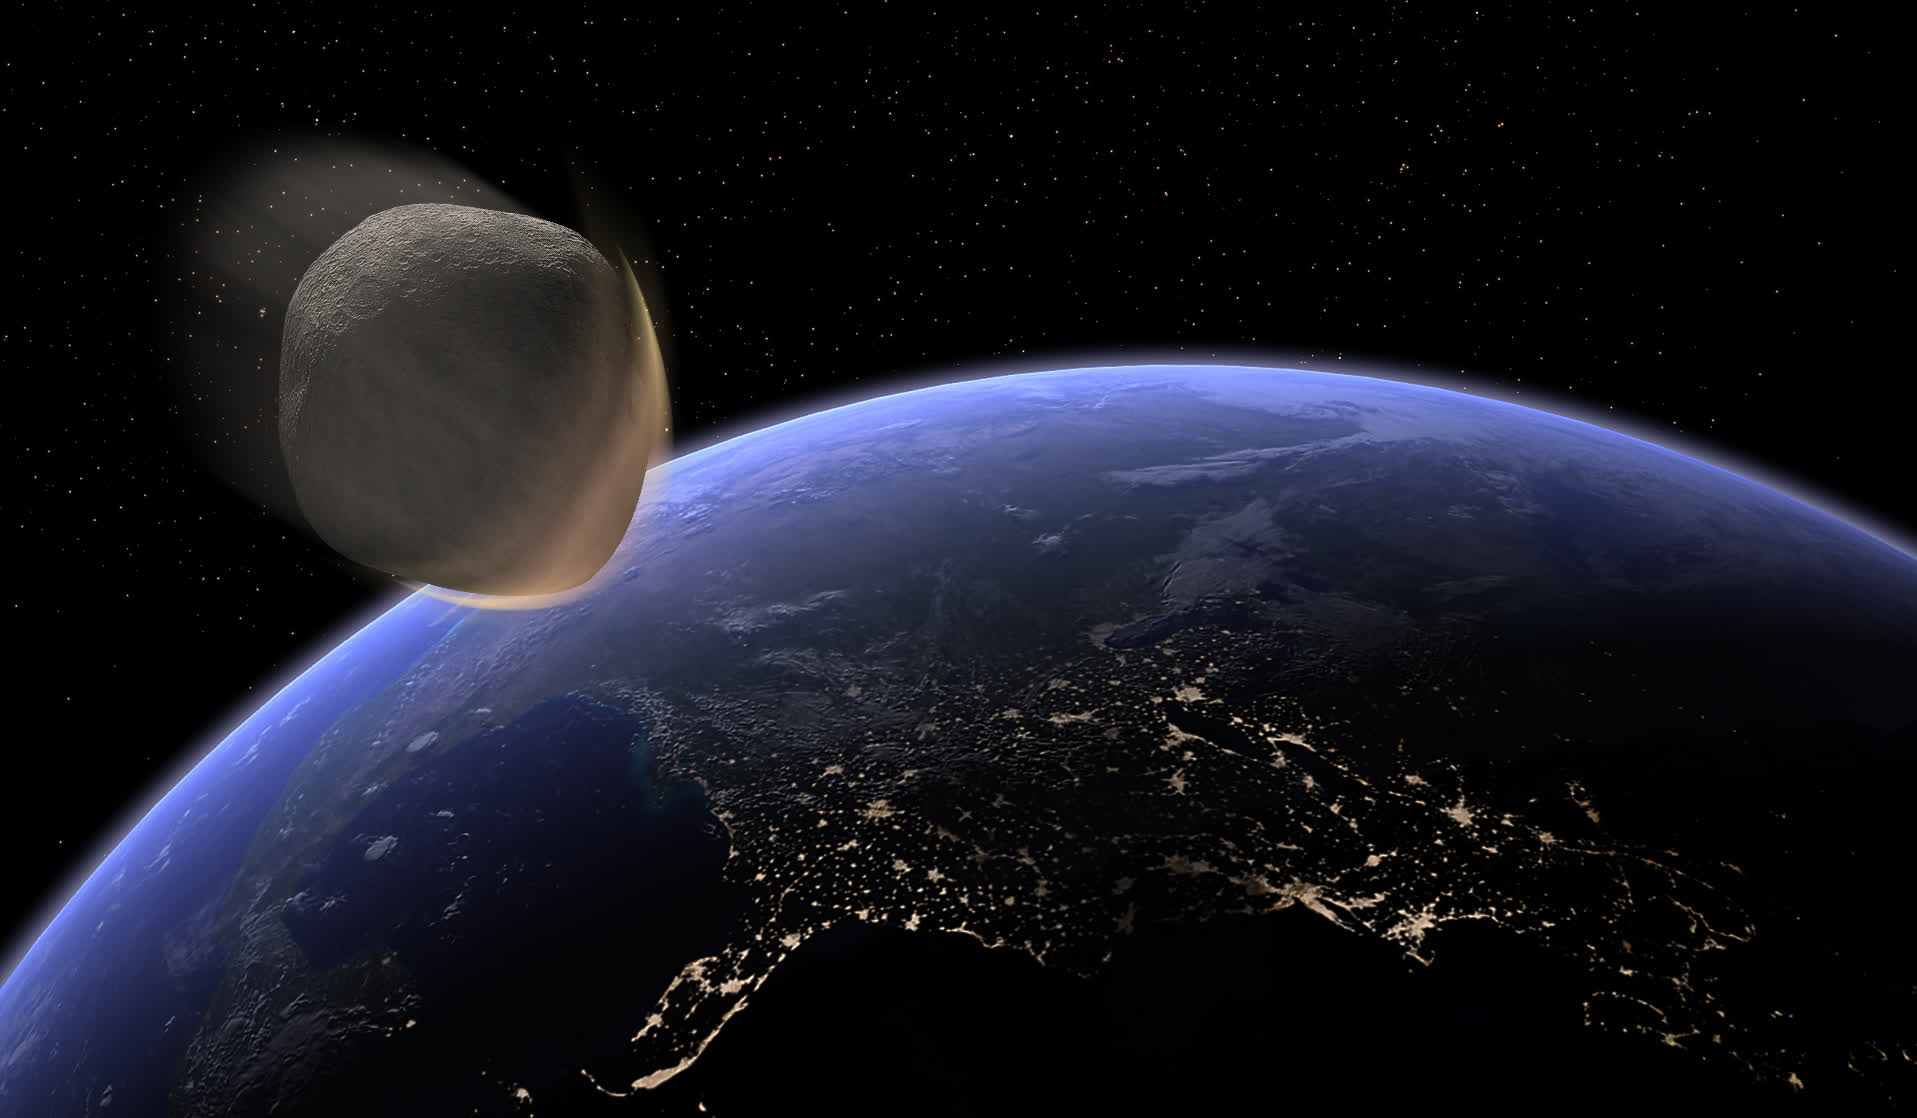 An asteroid came so close to the Earth that its orbit was permanently altered